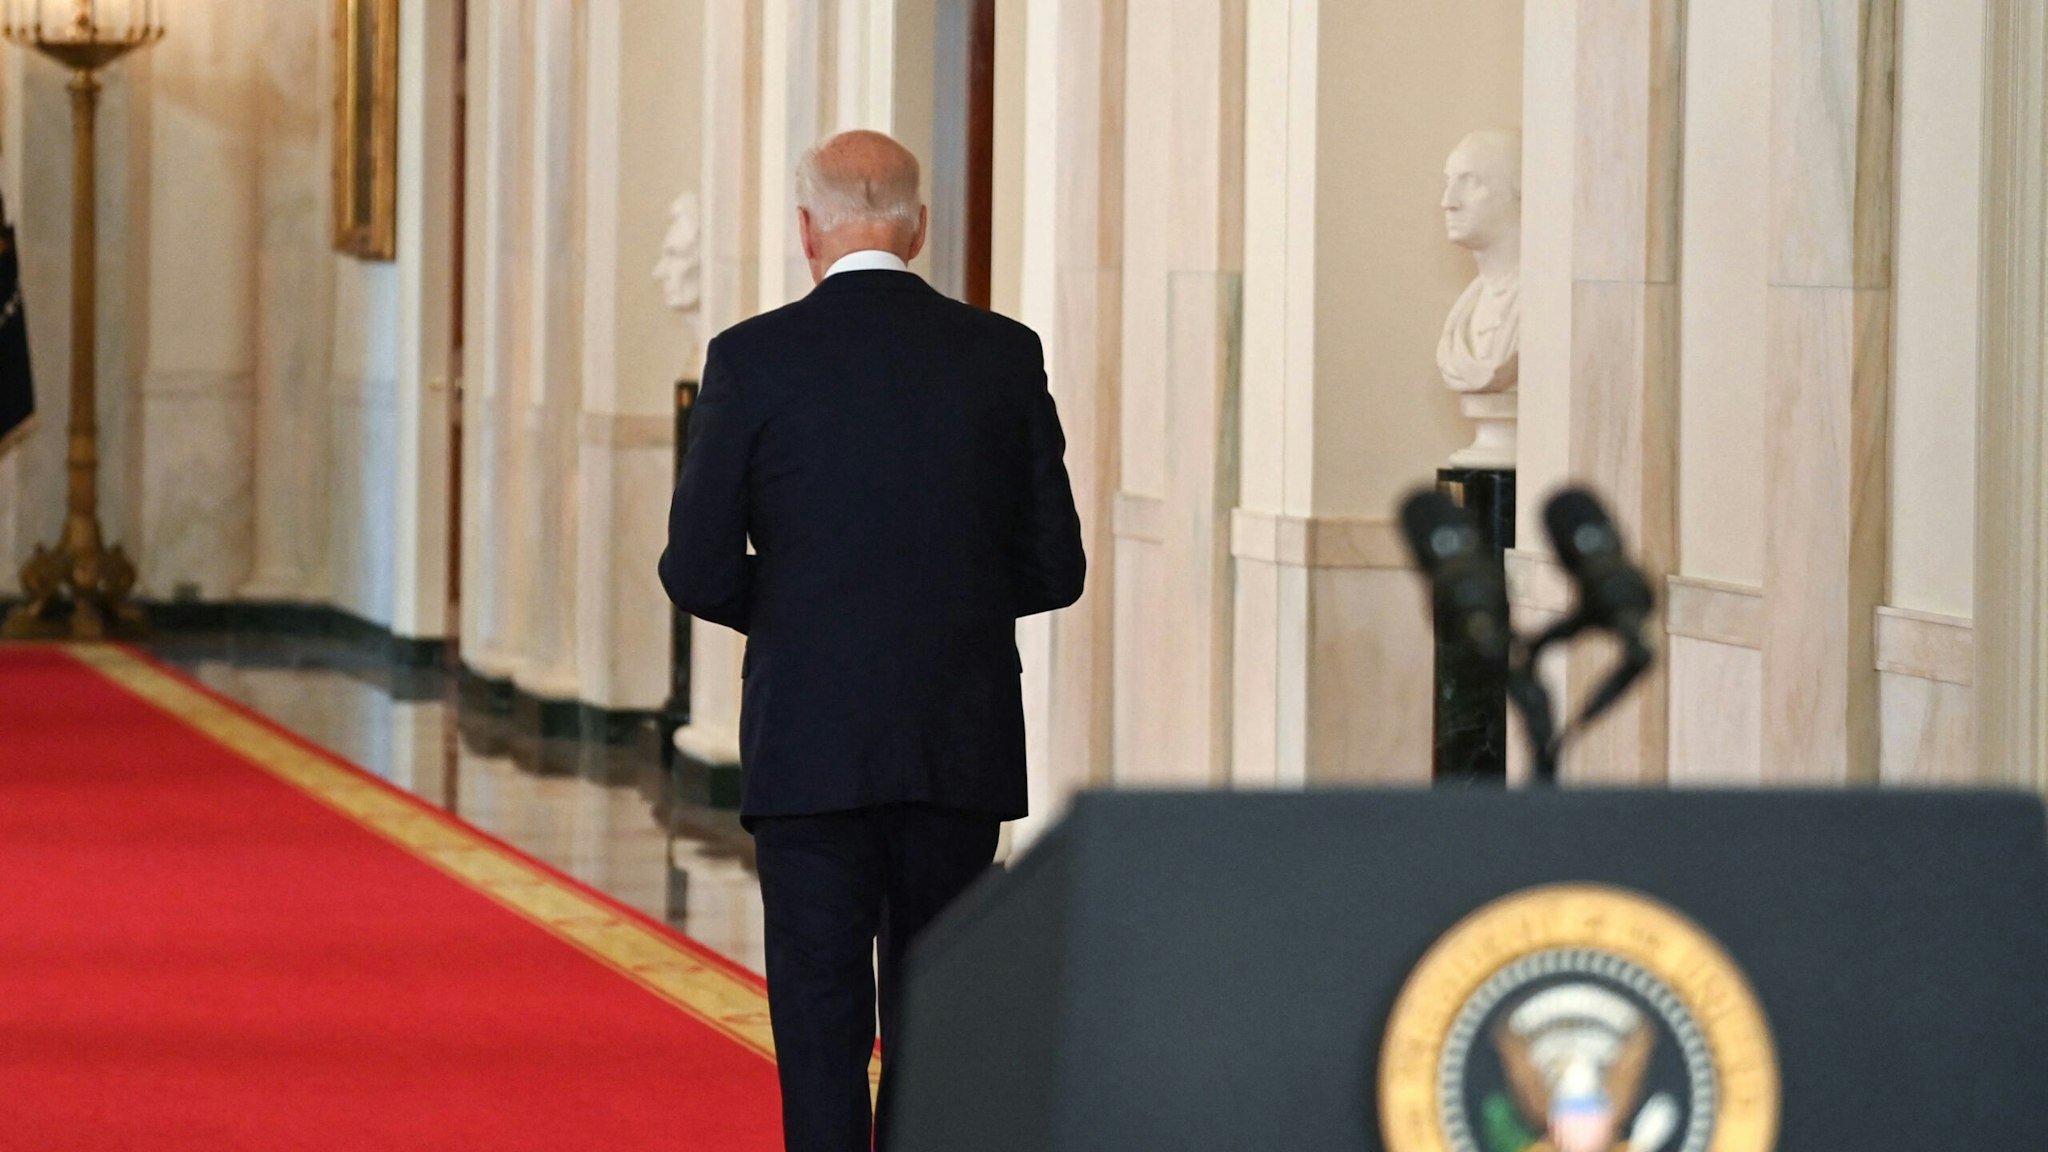 US President Joe Biden walks from the podium after speaking on ending the war in Afghanistan in the State Dining Room at the White House in Washington, DC, on August 31, 2021. - US President Joe Biden is addressing the nation on the US exit from Afghanistan after a failed 20 year war that he'd vowed to end but whose chaotic last days are now overshadowing his presidency.